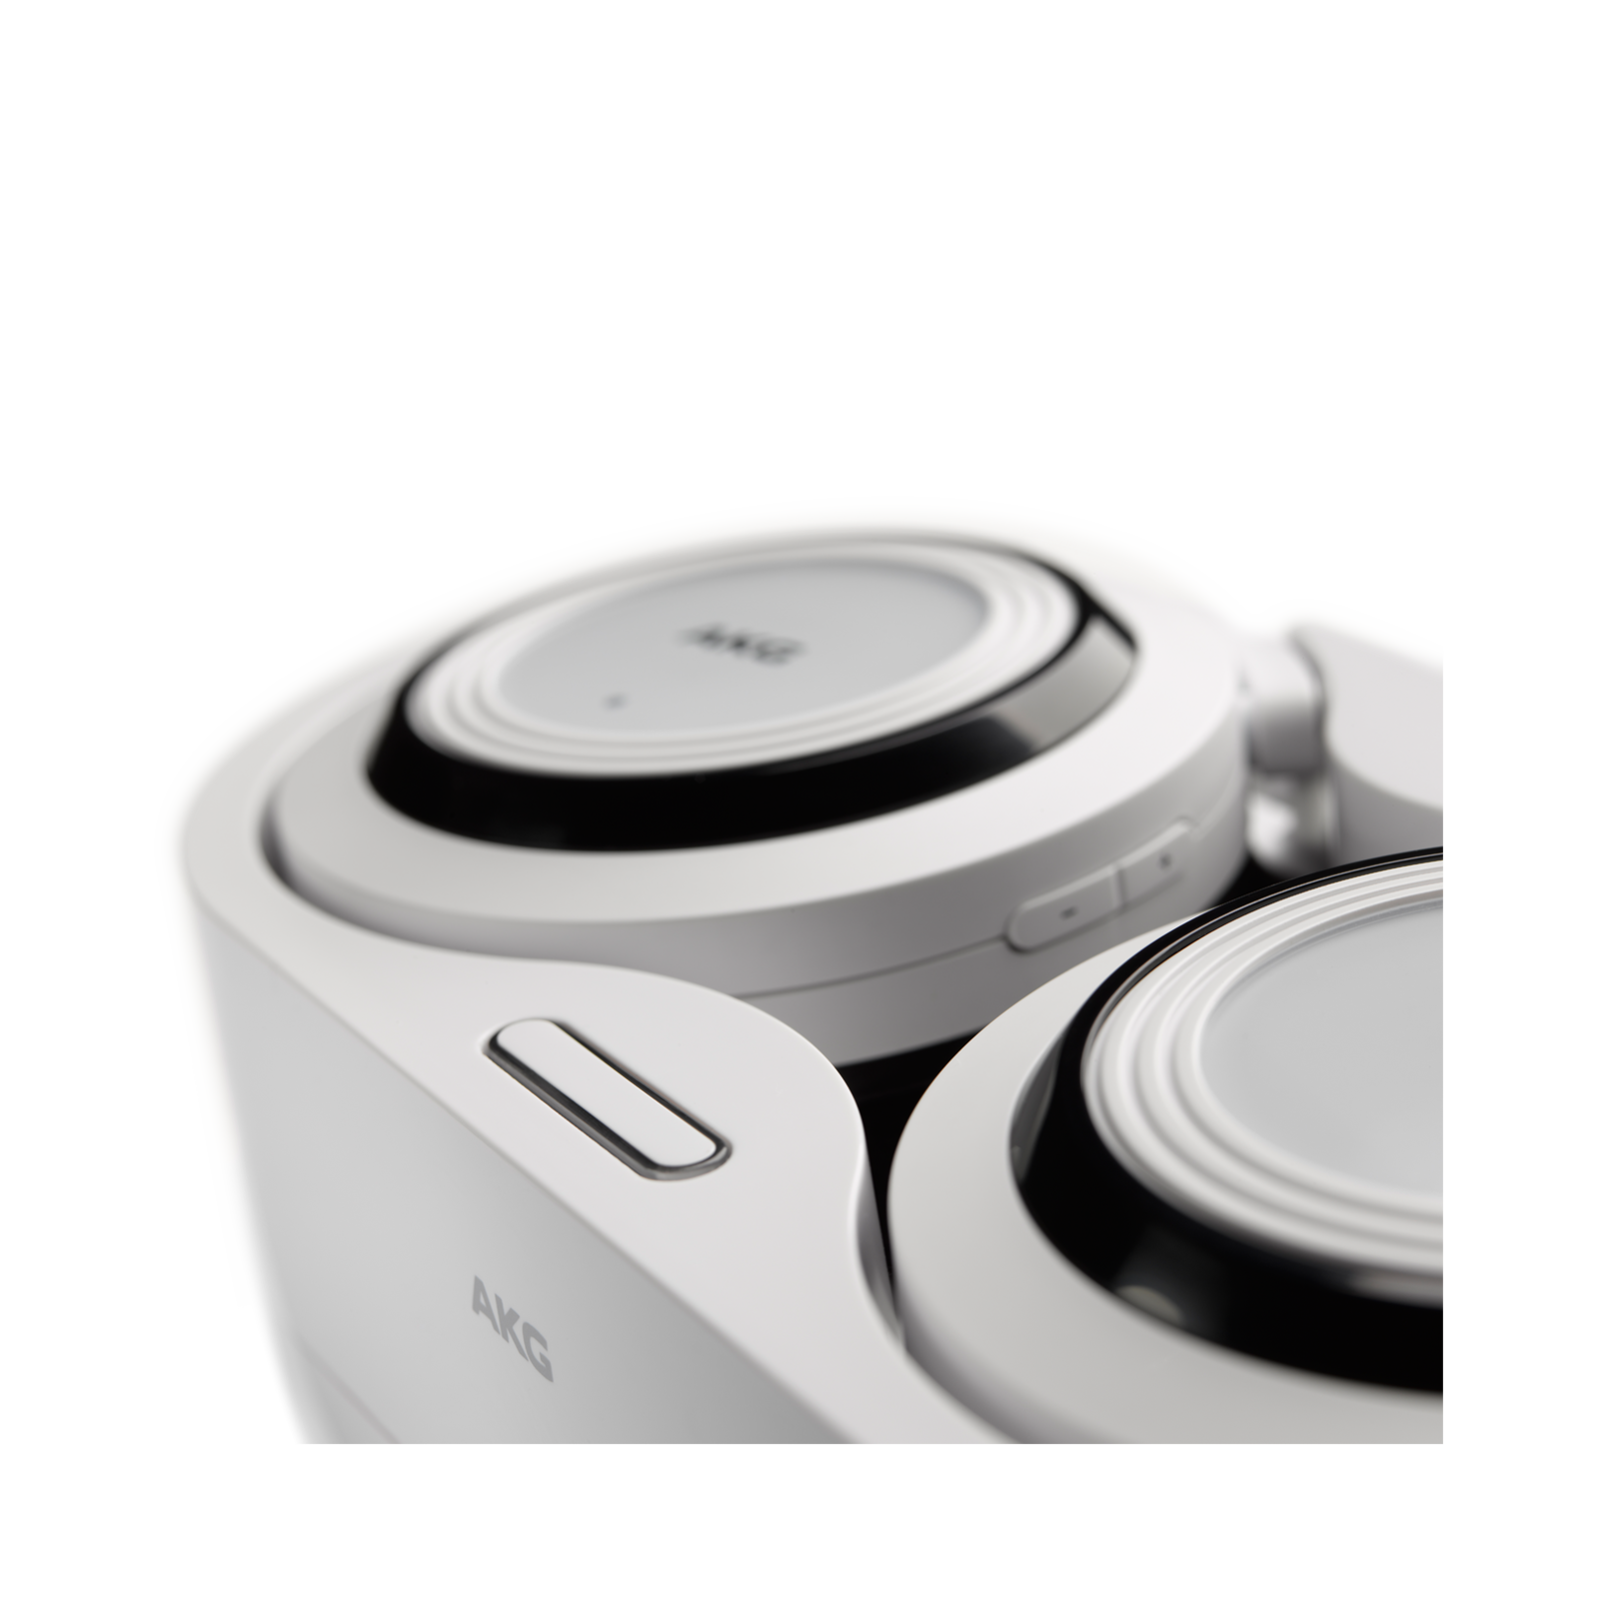 K 935 - White - High performance digital wireless stereo headphone optimized for movies, games and music - Detailshot 2